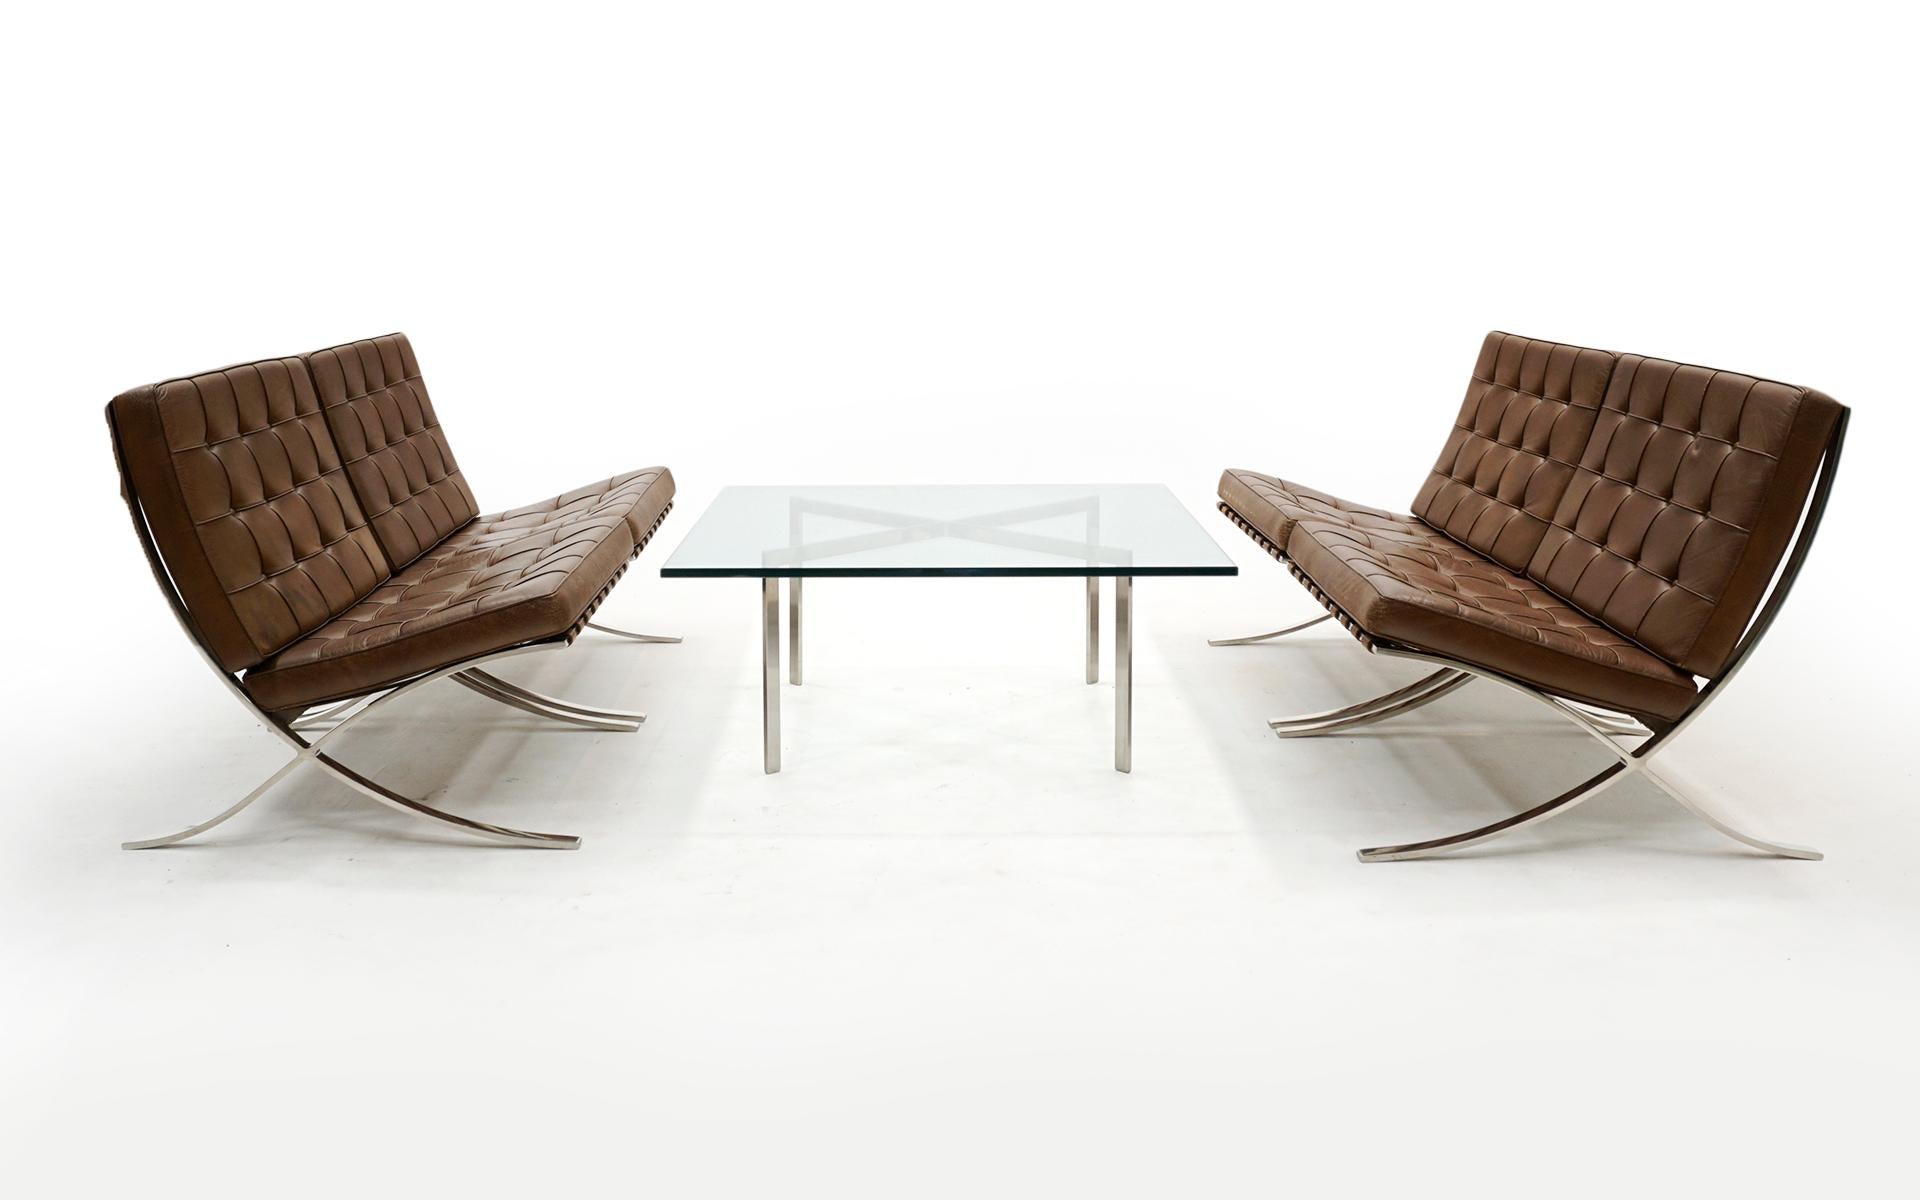 Barcelona Coffee Table by Mies van der Rohe for Knoll, Early 1960s Production For Sale 1